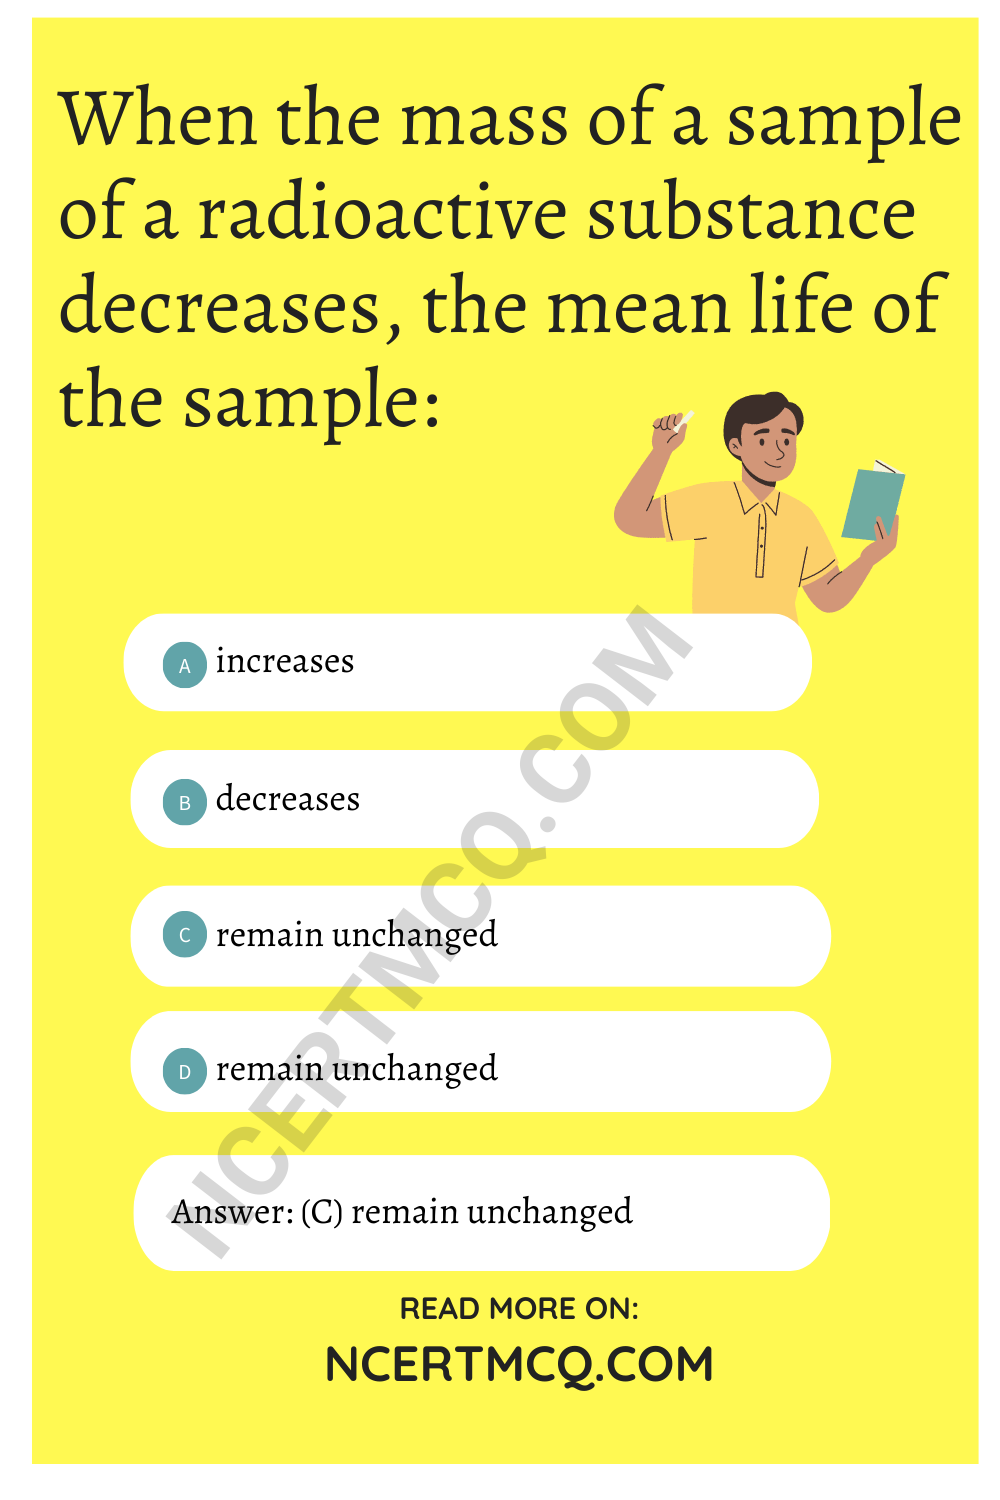 When the mass of a sample of a radioactive substance decreases, the mean life of the sample: